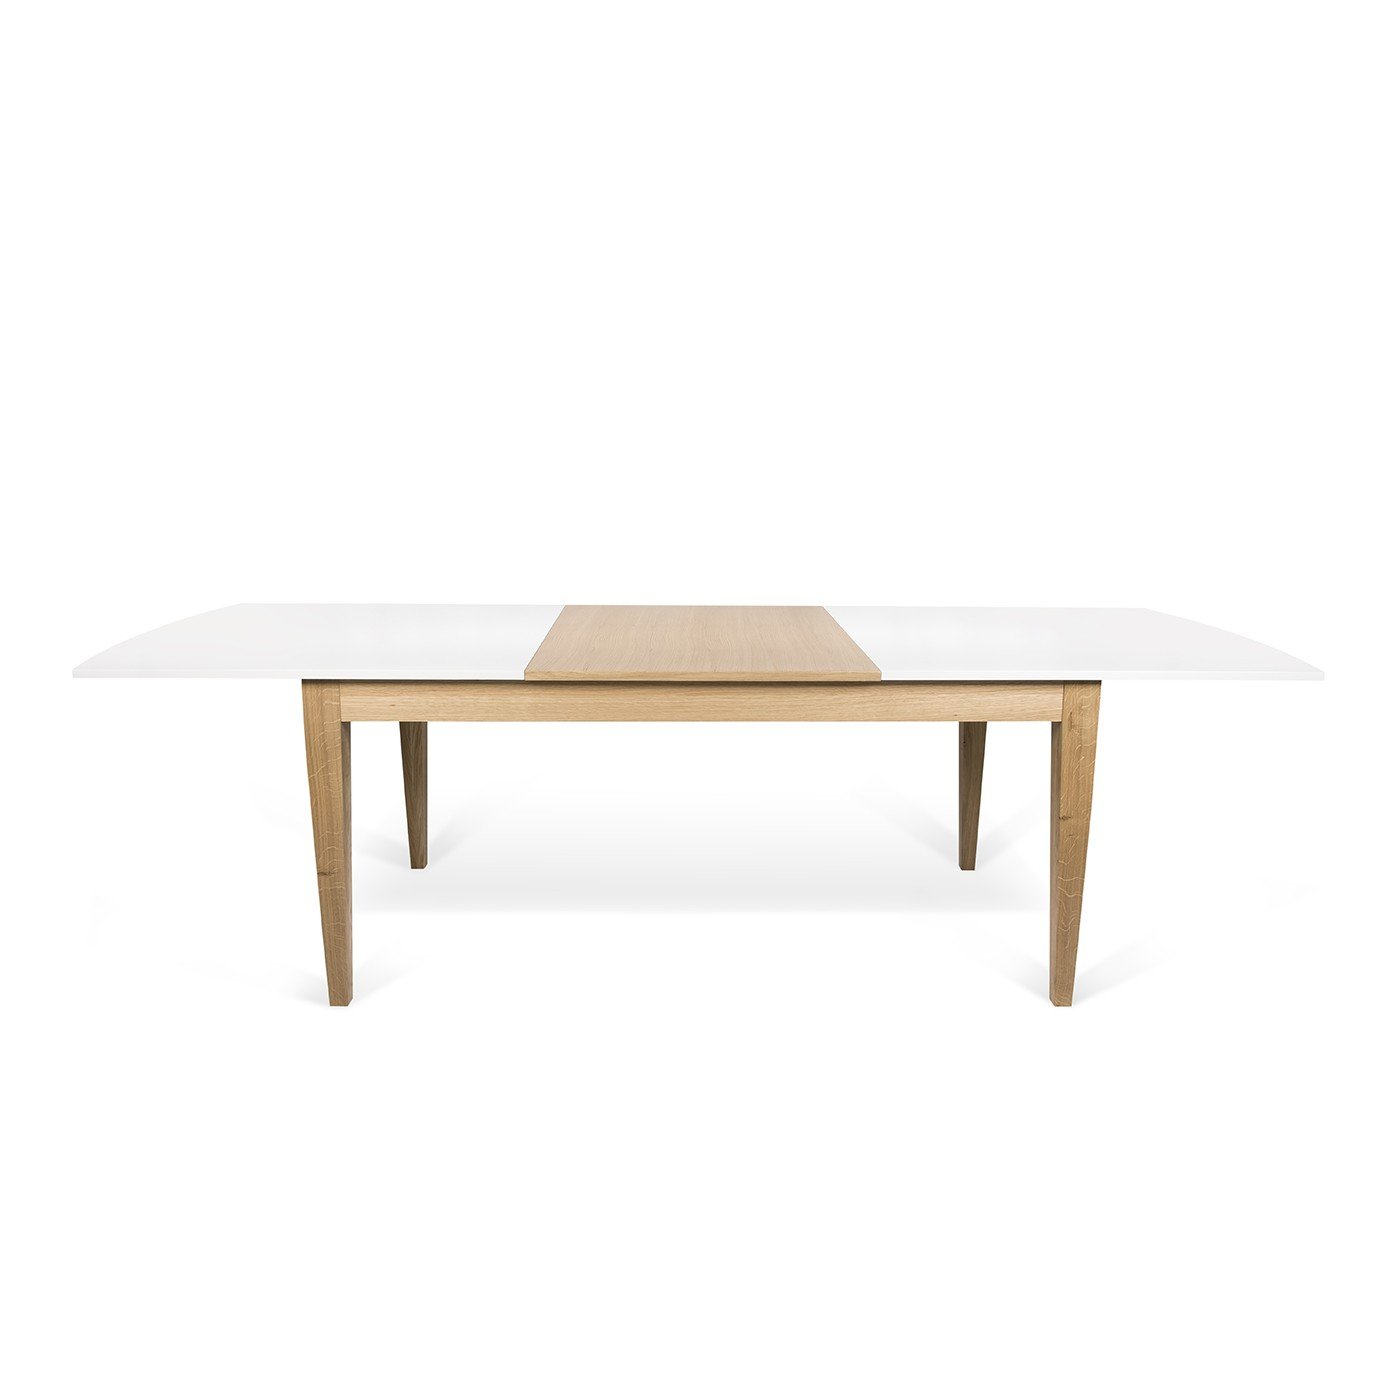 albee extendable table